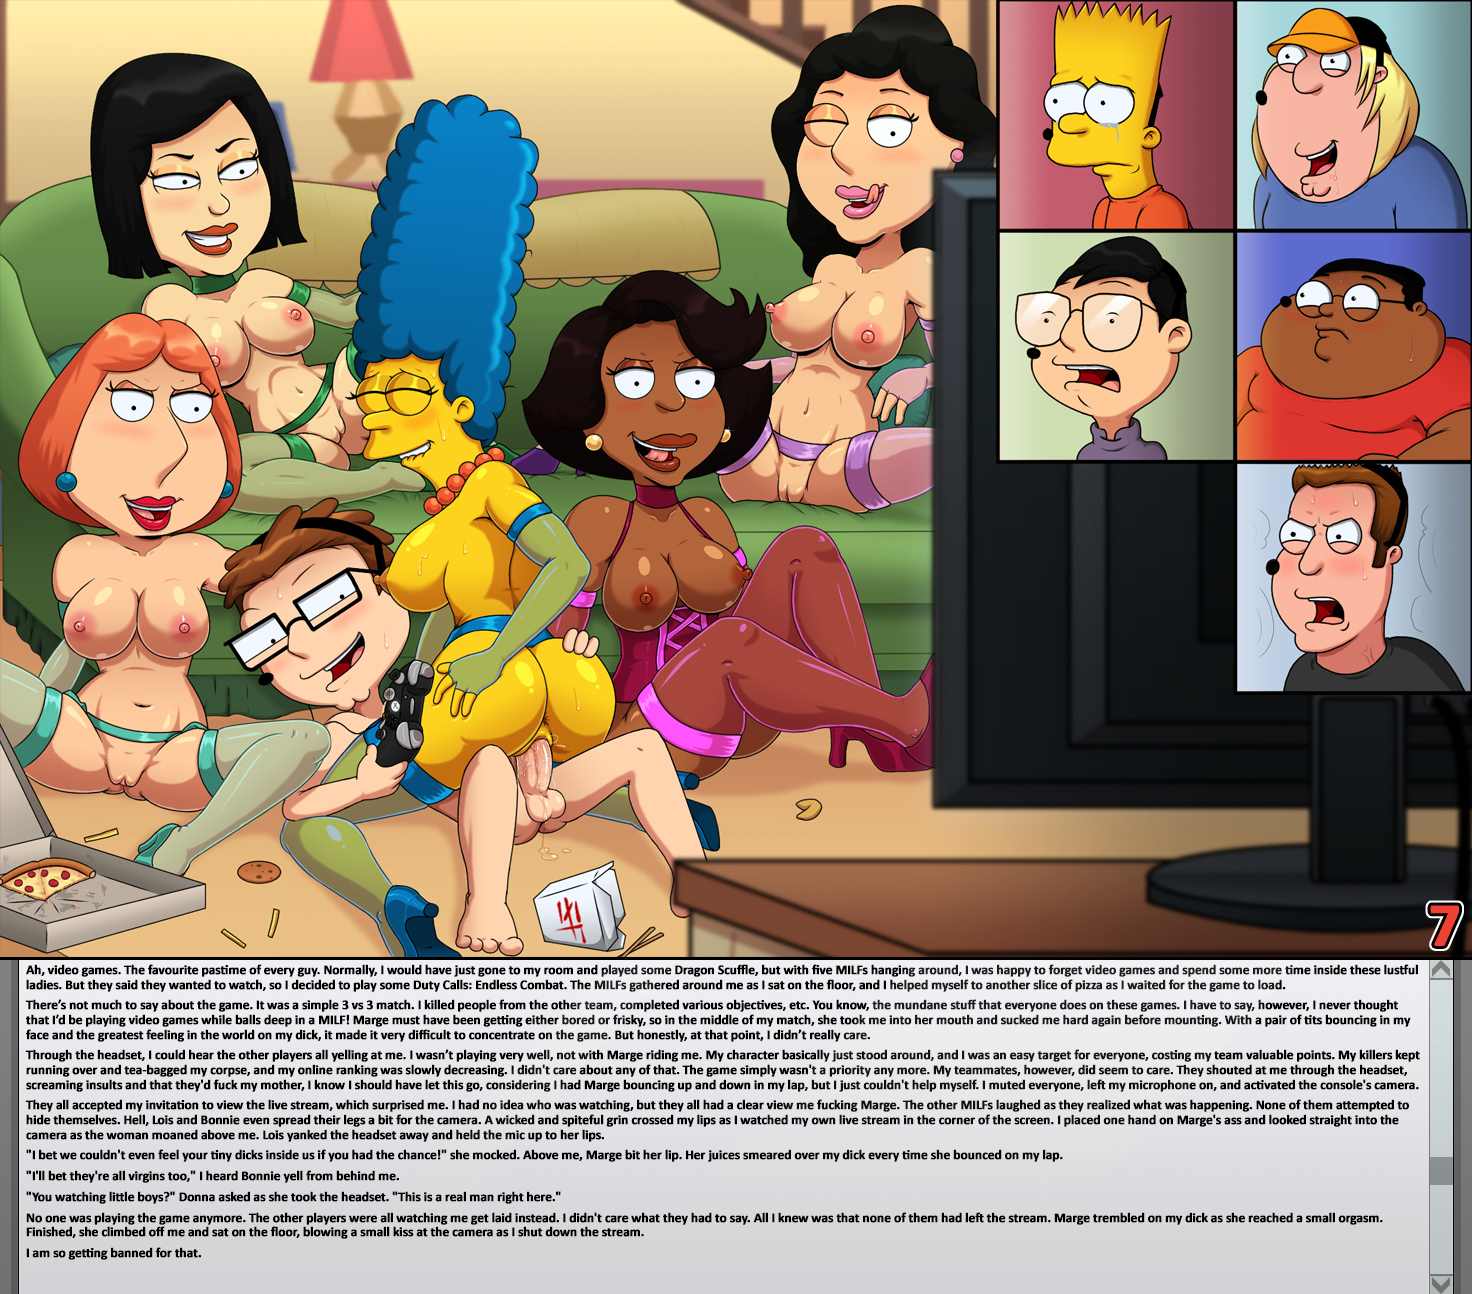 American Dad Cleveland Show Porn - Post 2287307: American_Dad Bart_Simpson Bonnie_Swanson Chris_Griffin  Cleveland_Brown_Jr. crossover Donna_Tubbs Family_Guy Hiko_Yoshida  Kevin_Swanson Lois_Griffin Marge_Simpson slappyfrog Steve_Smith  The_Cleveland_Show The_Simpsons Toshi_Yoshida